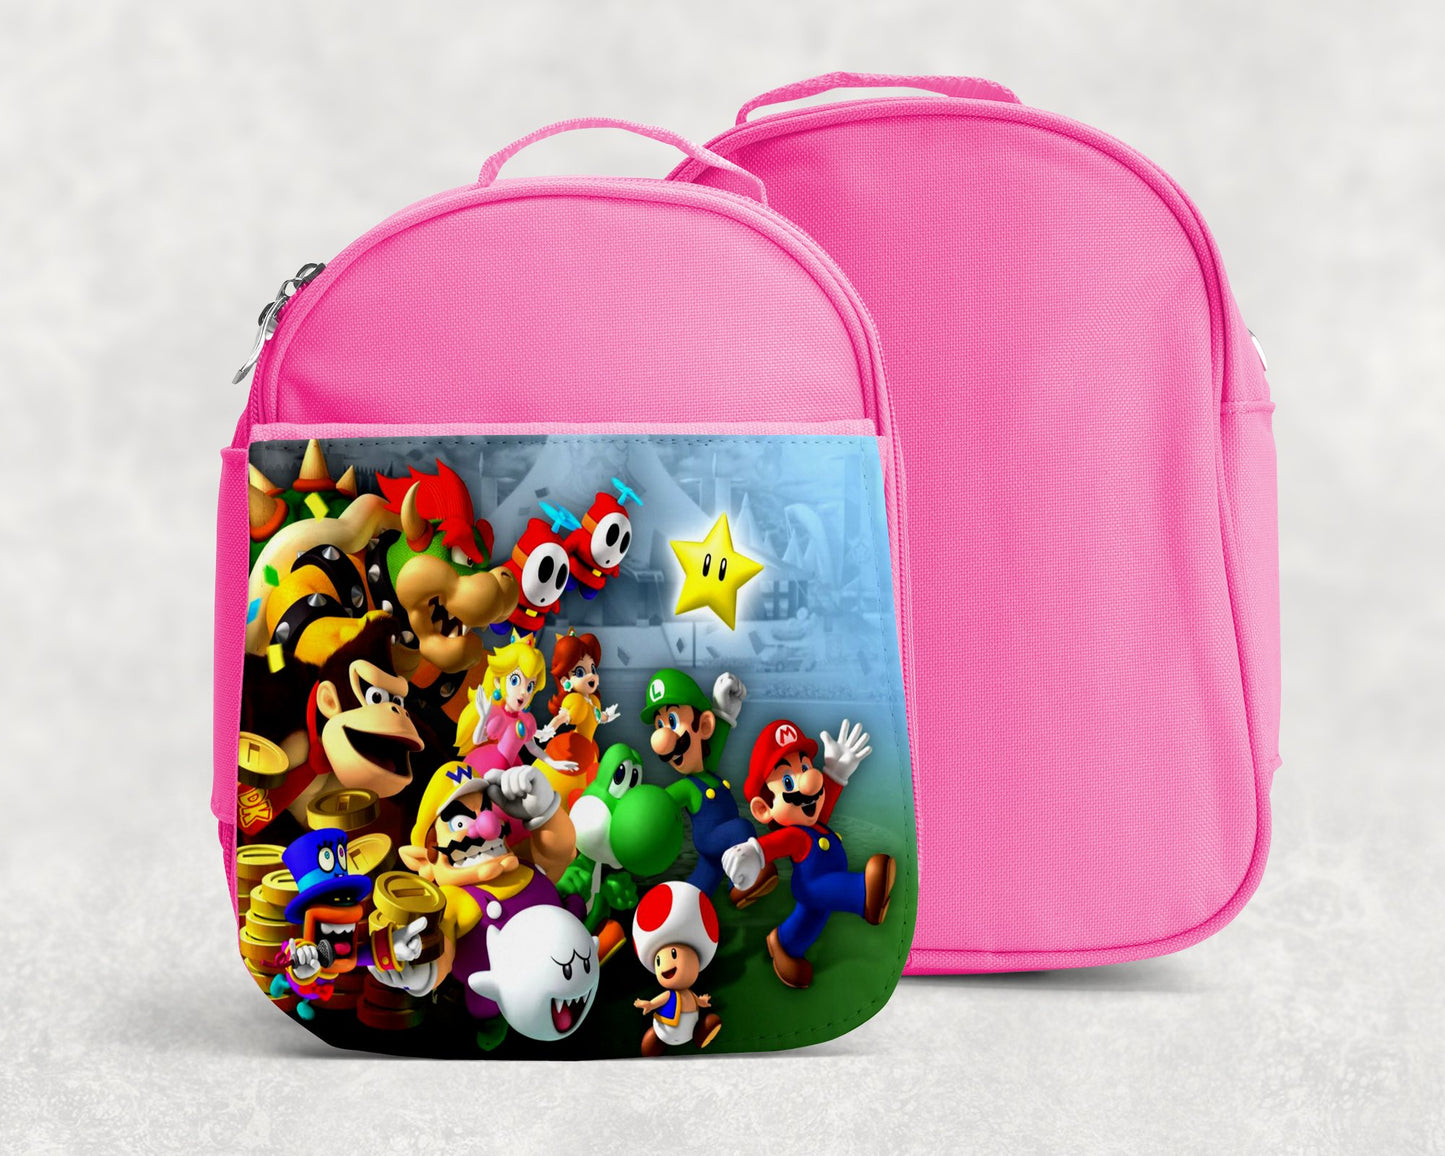 Mario Lunch Tote